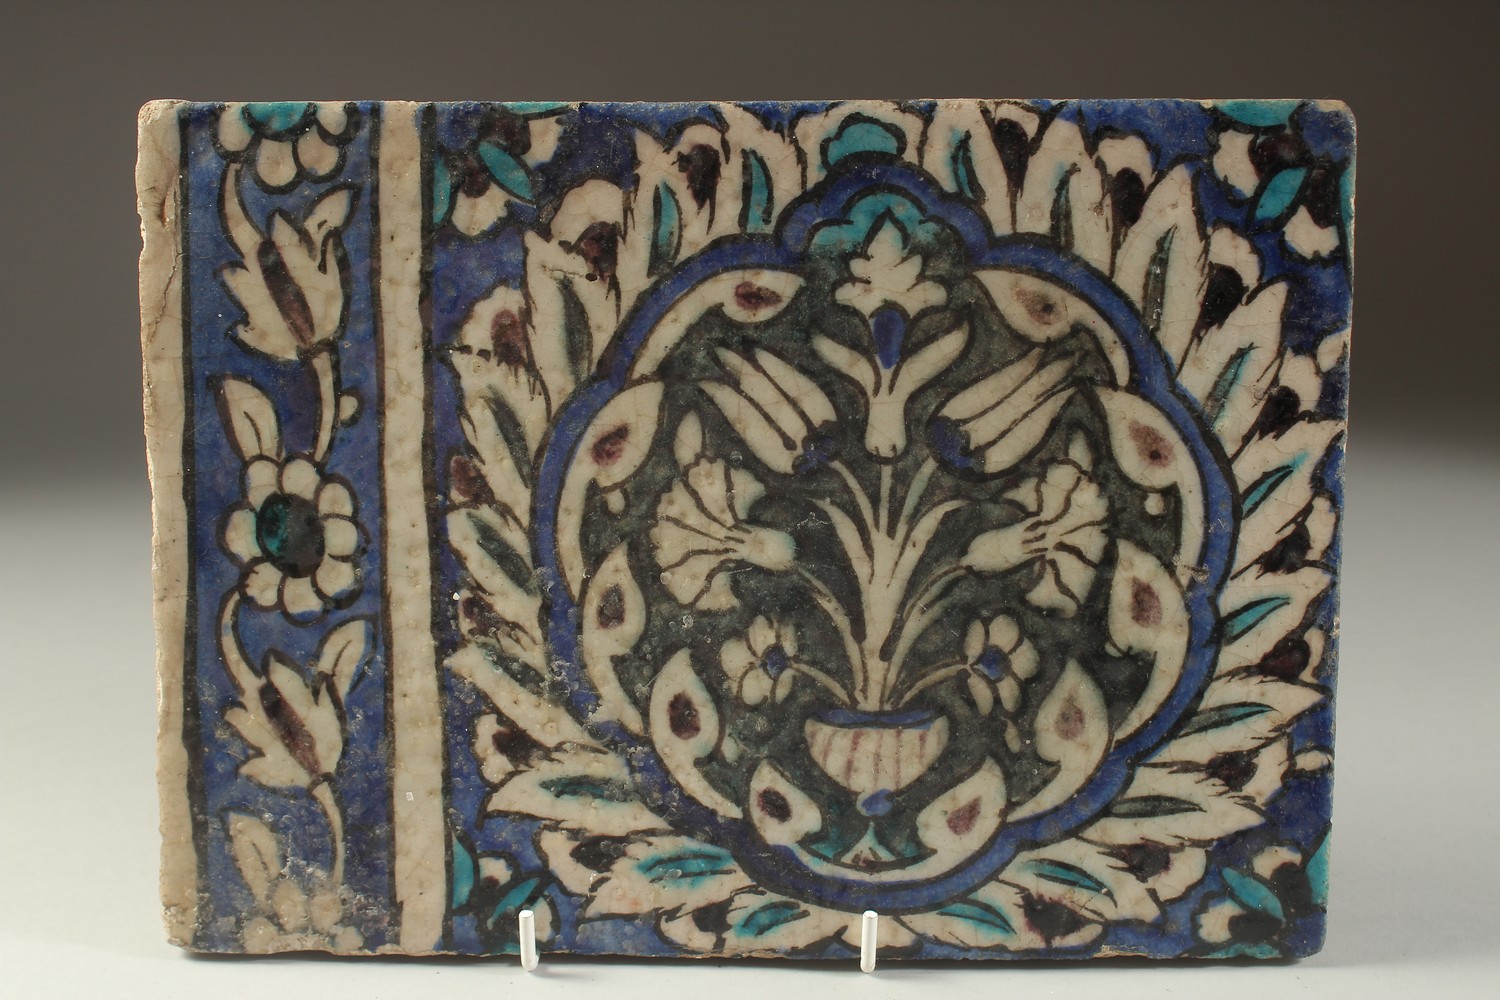 A FINE 17TH CENTURY OTTOMAN DAMASCUS GLAZED POTTERY TILE, with a large lotus flower, tulips and